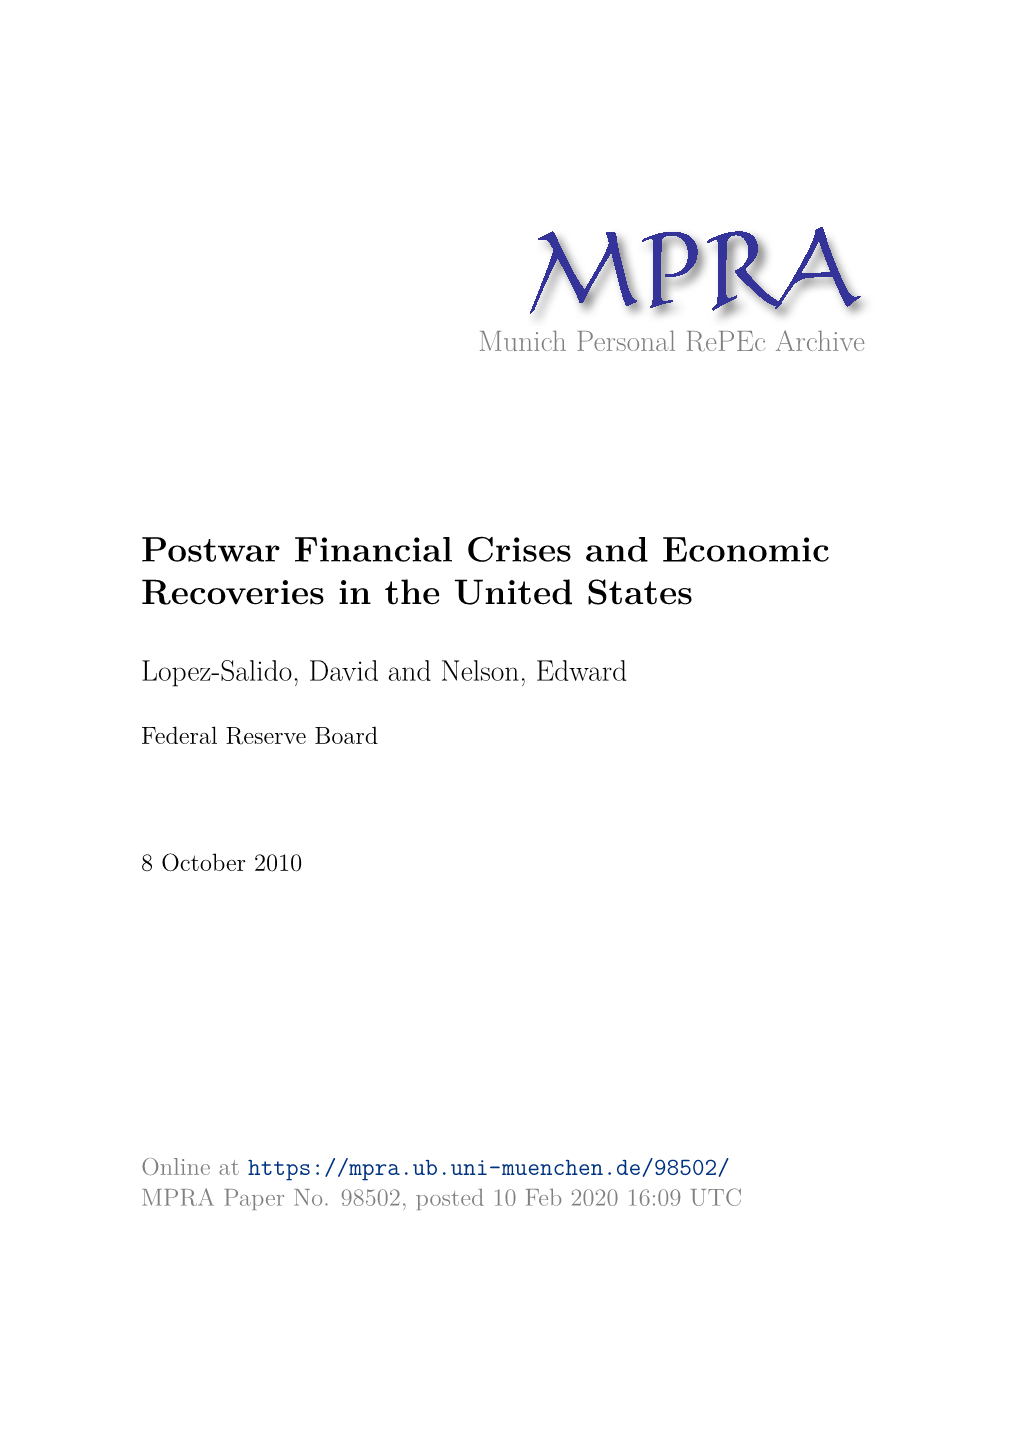 Postwar Financial Crises and Economic Recoveries in the United States